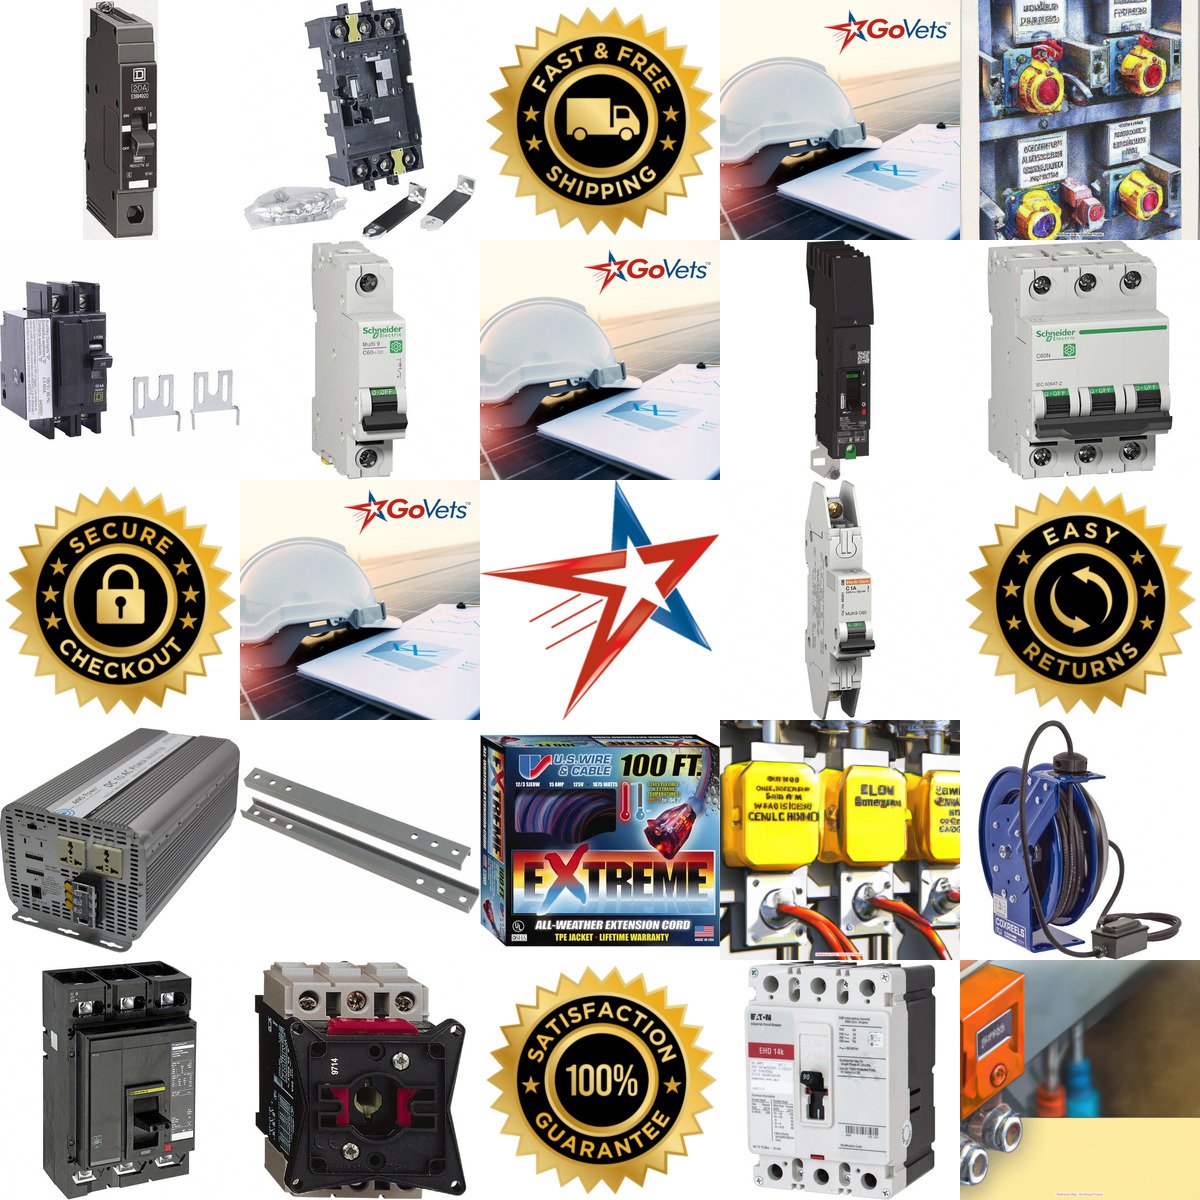 A selection of Power Distribution and Generation products on GoVets